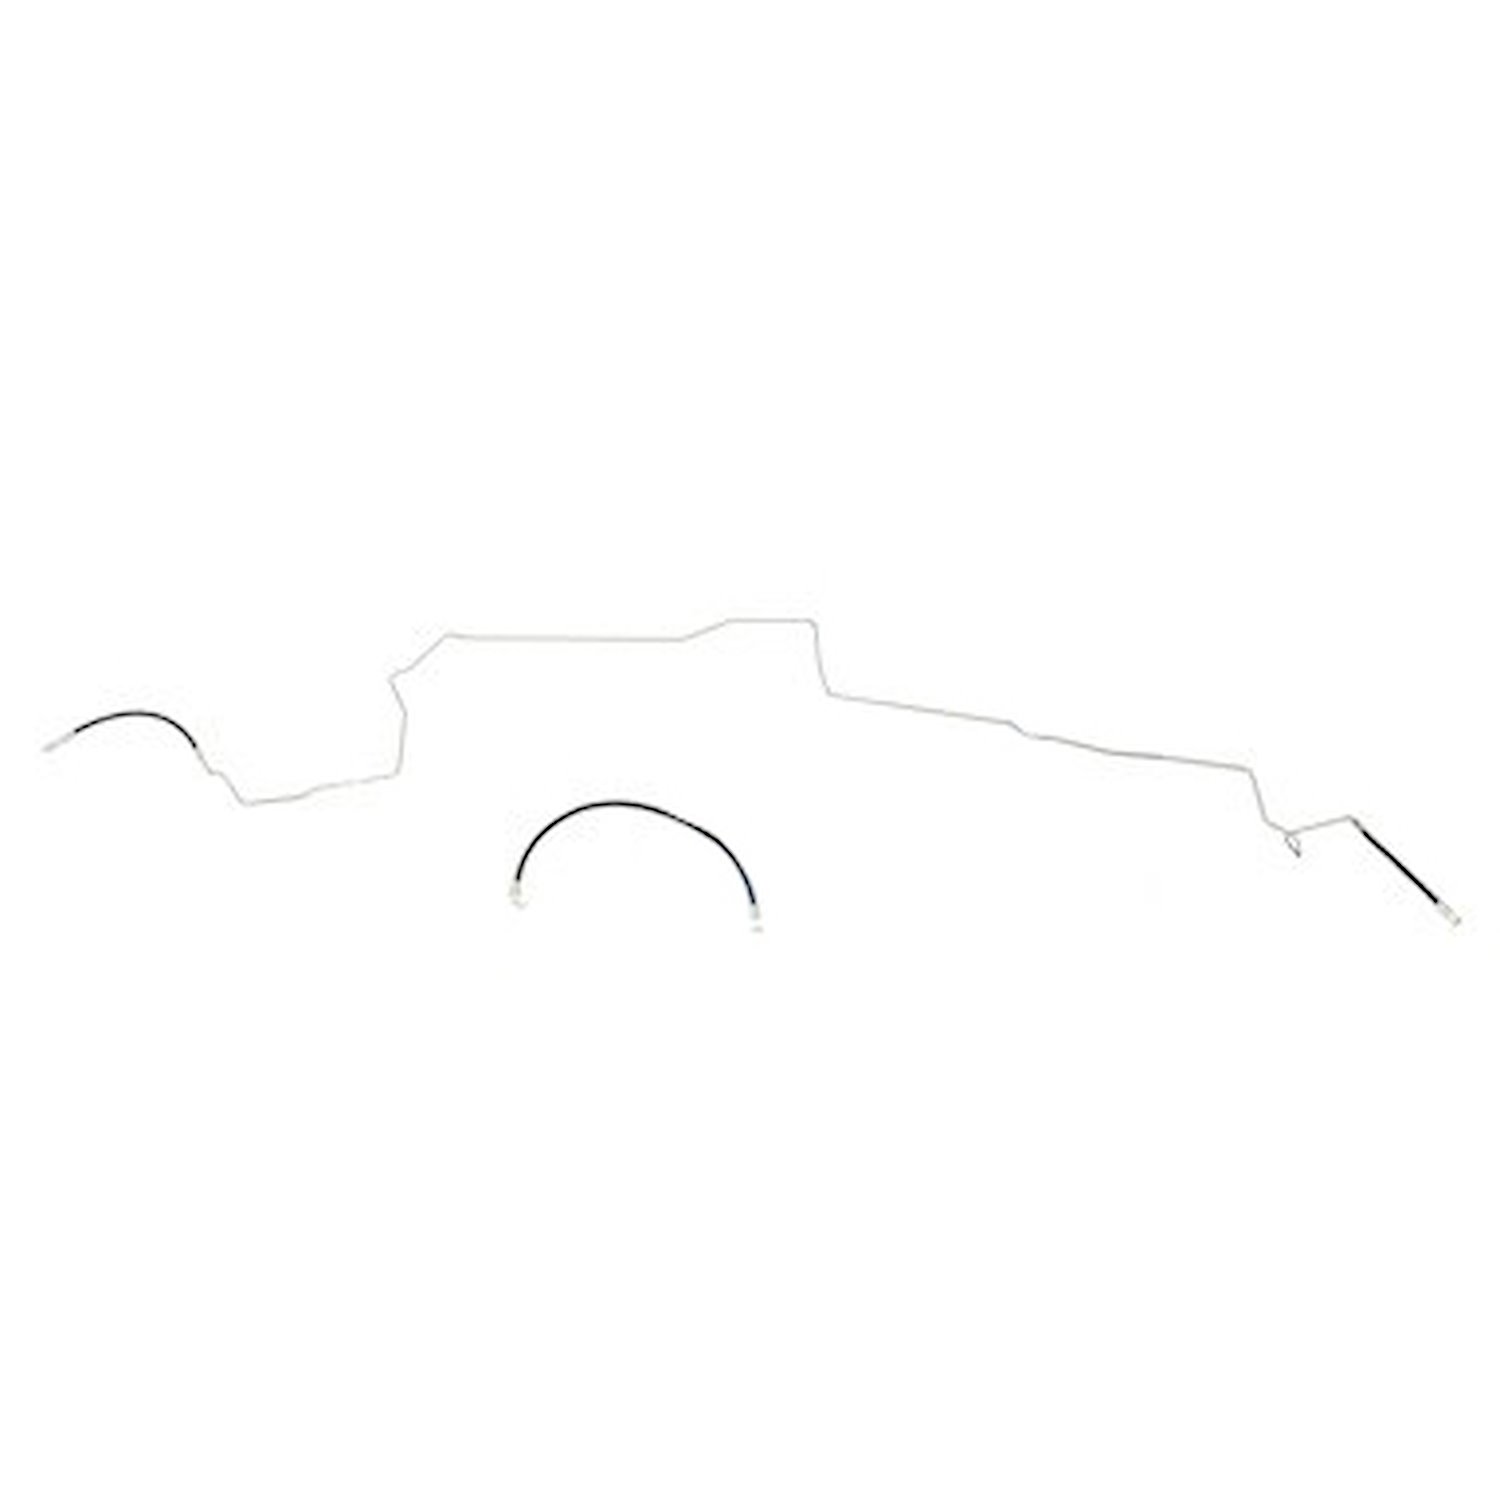 Ford Mustang Fuel Supply Line -1986 1987 1988 1989 1990 1991 1992 1993